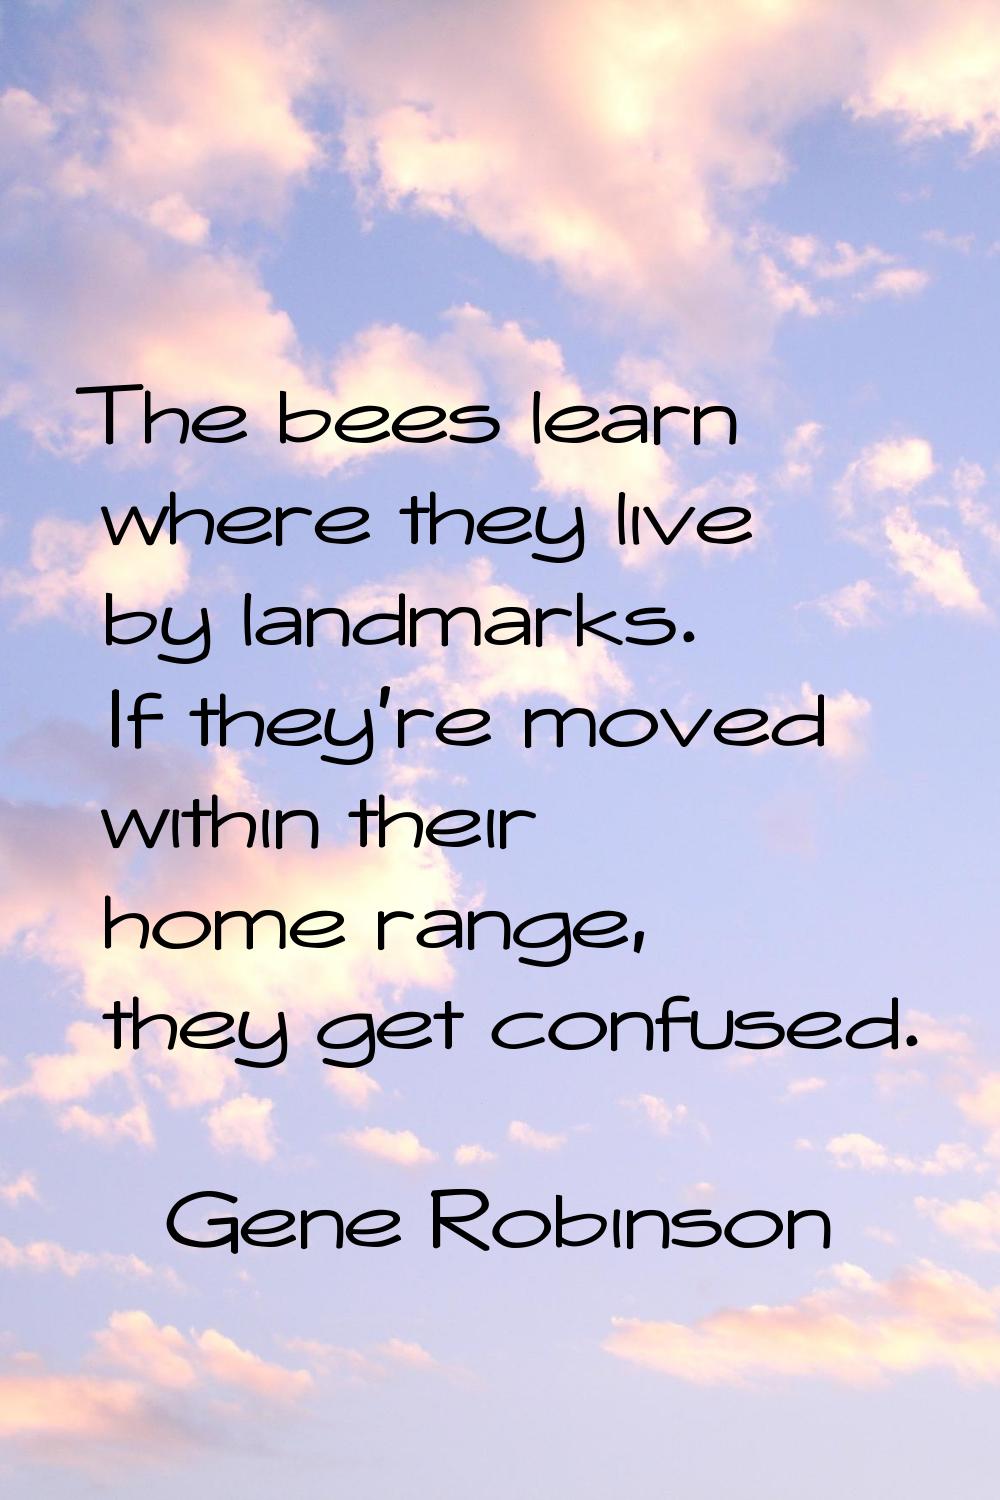 The bees learn where they live by landmarks. If they're moved within their home range, they get con